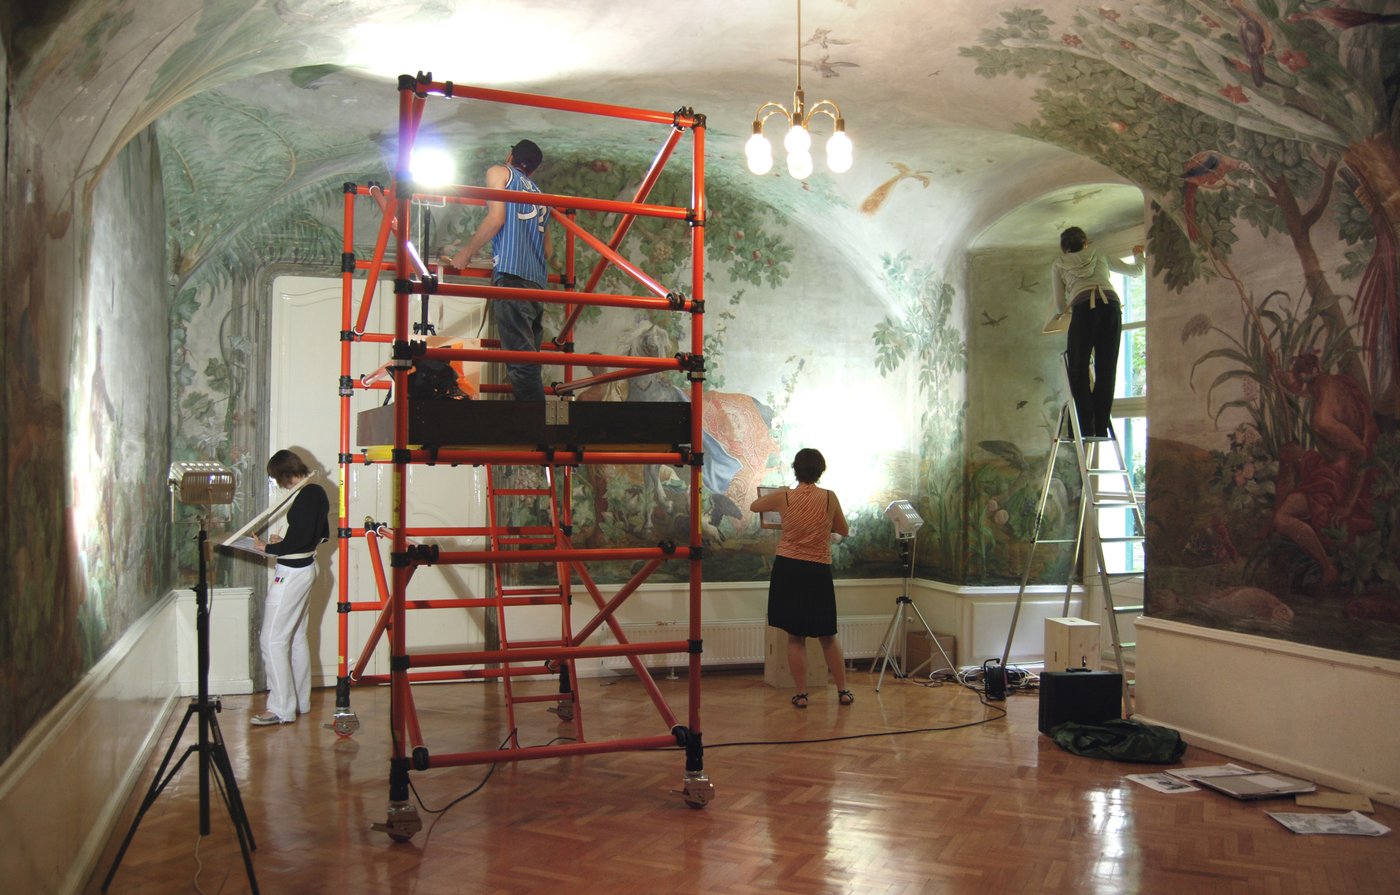 Four students working on the walls of the room, one is standing on a scaffolding.